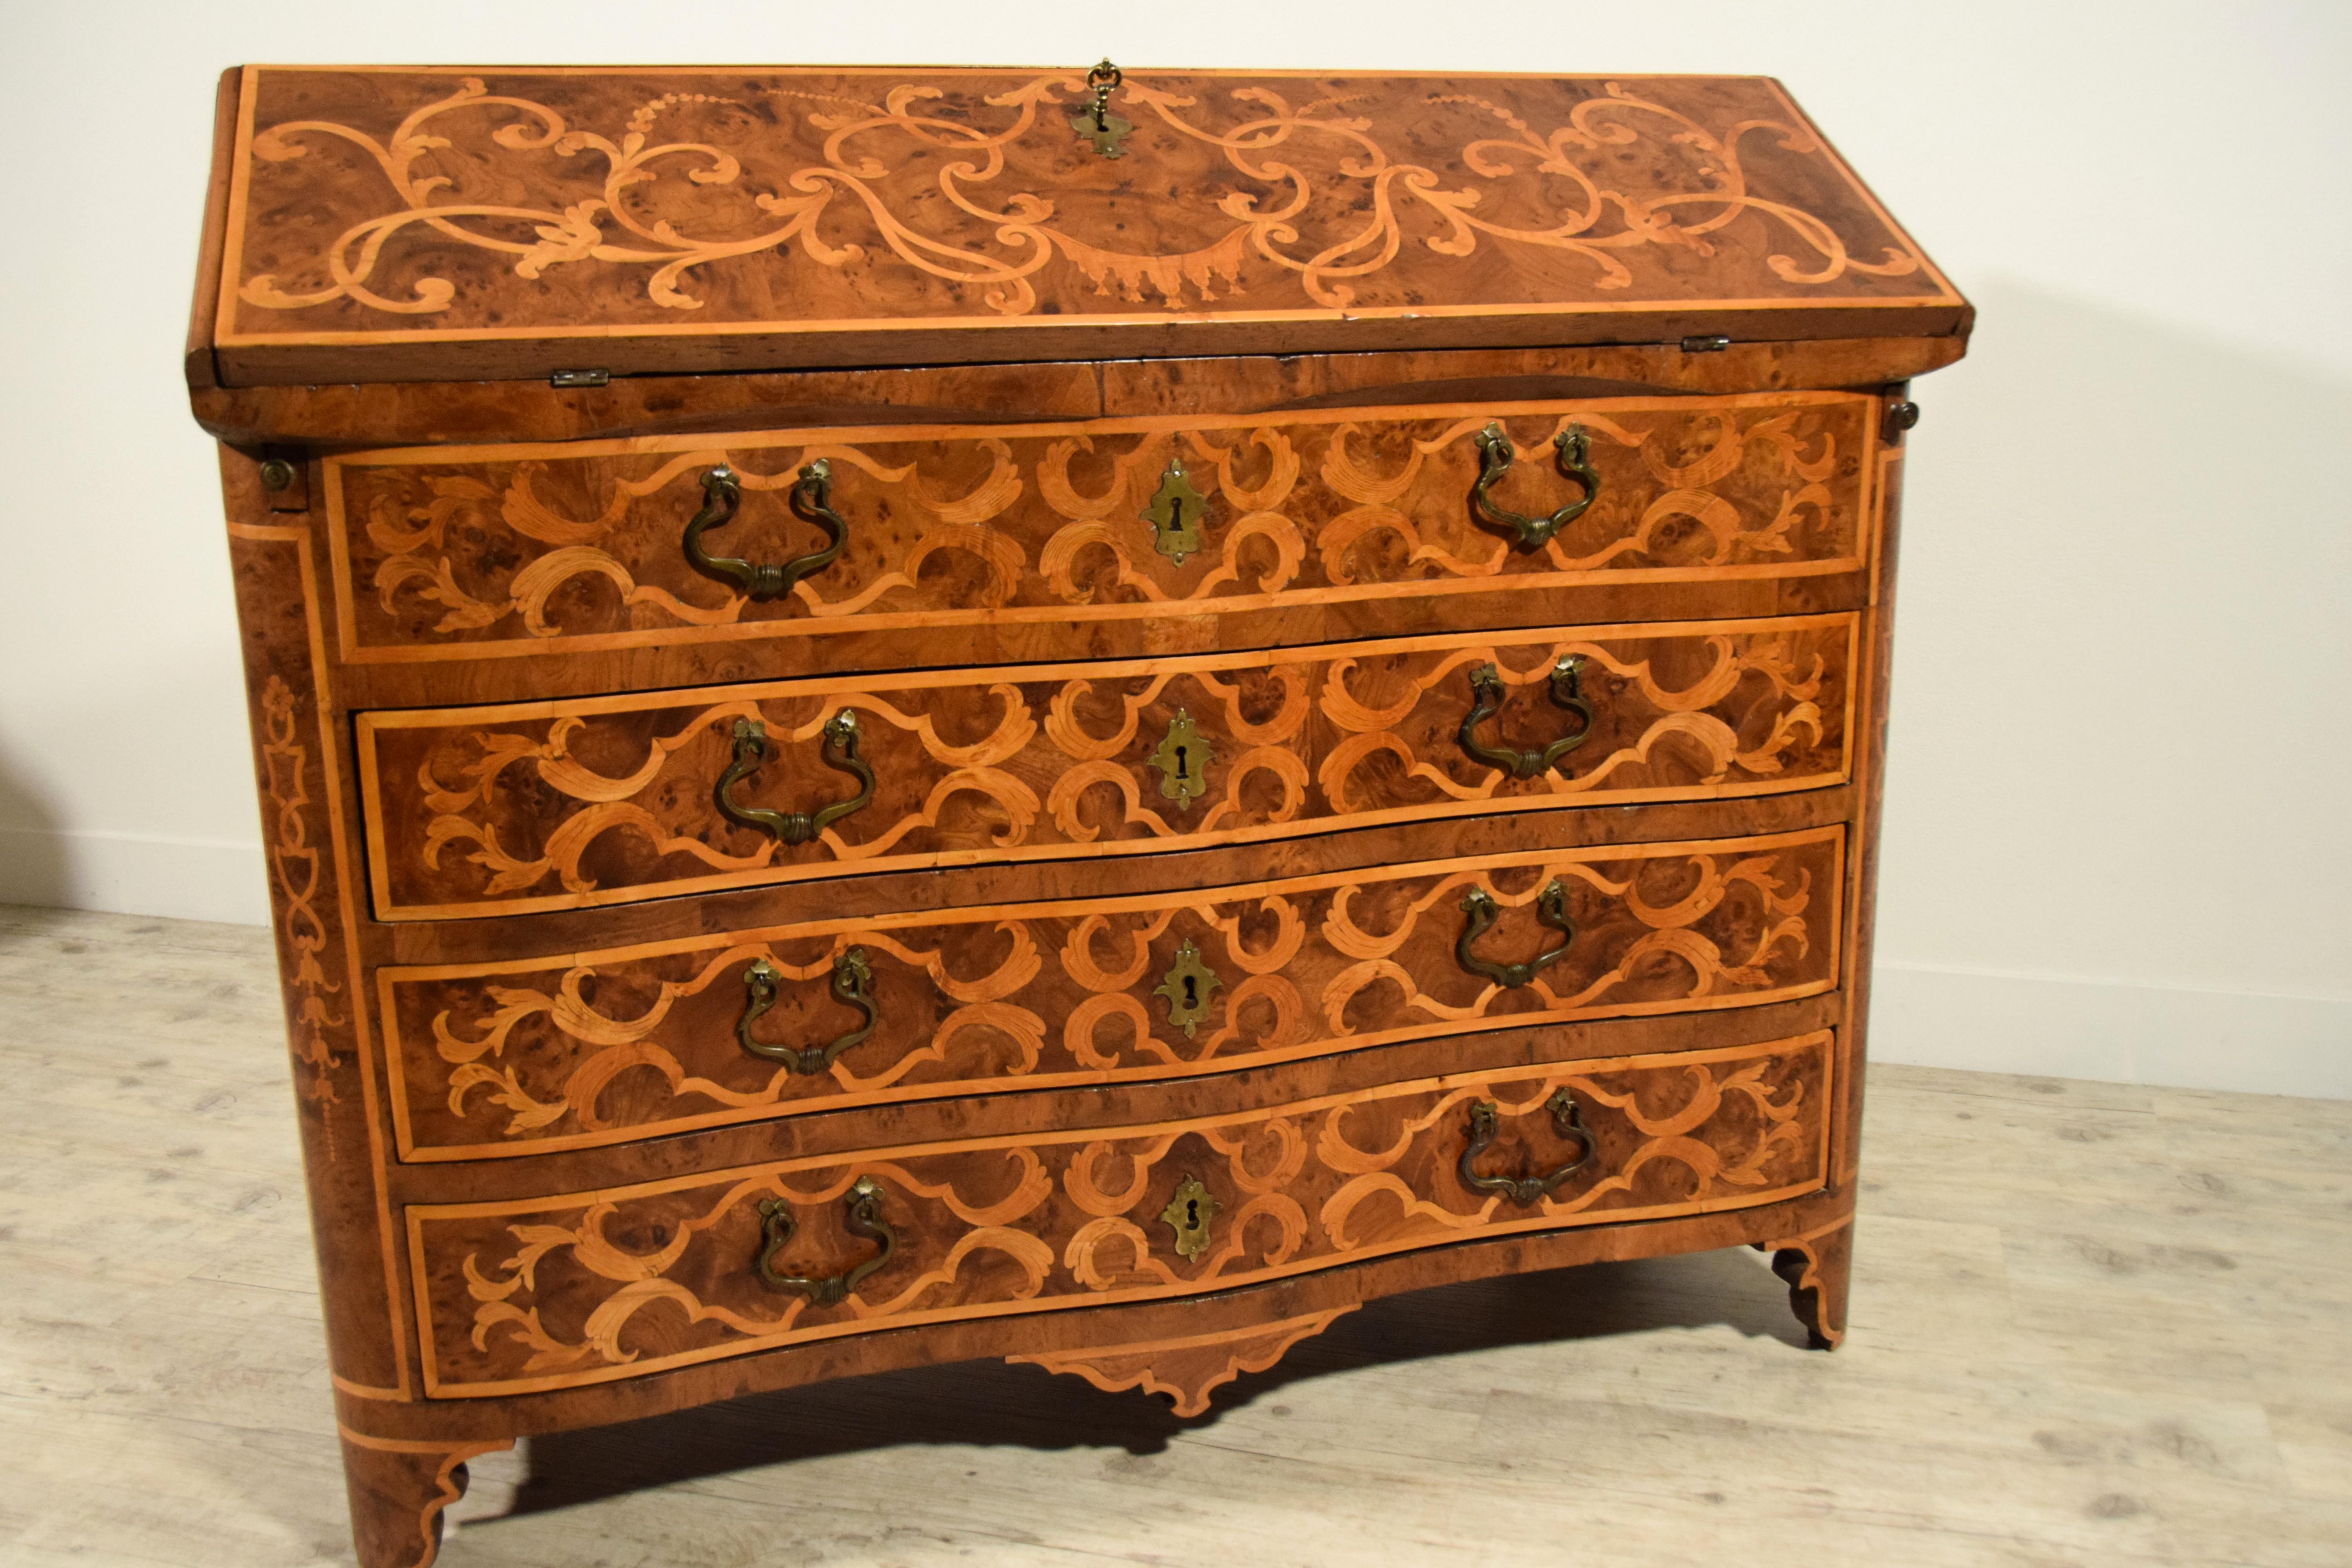 18th Century, Italian Inlaid Wood Chest of Drawers with Secretaire For Sale 12